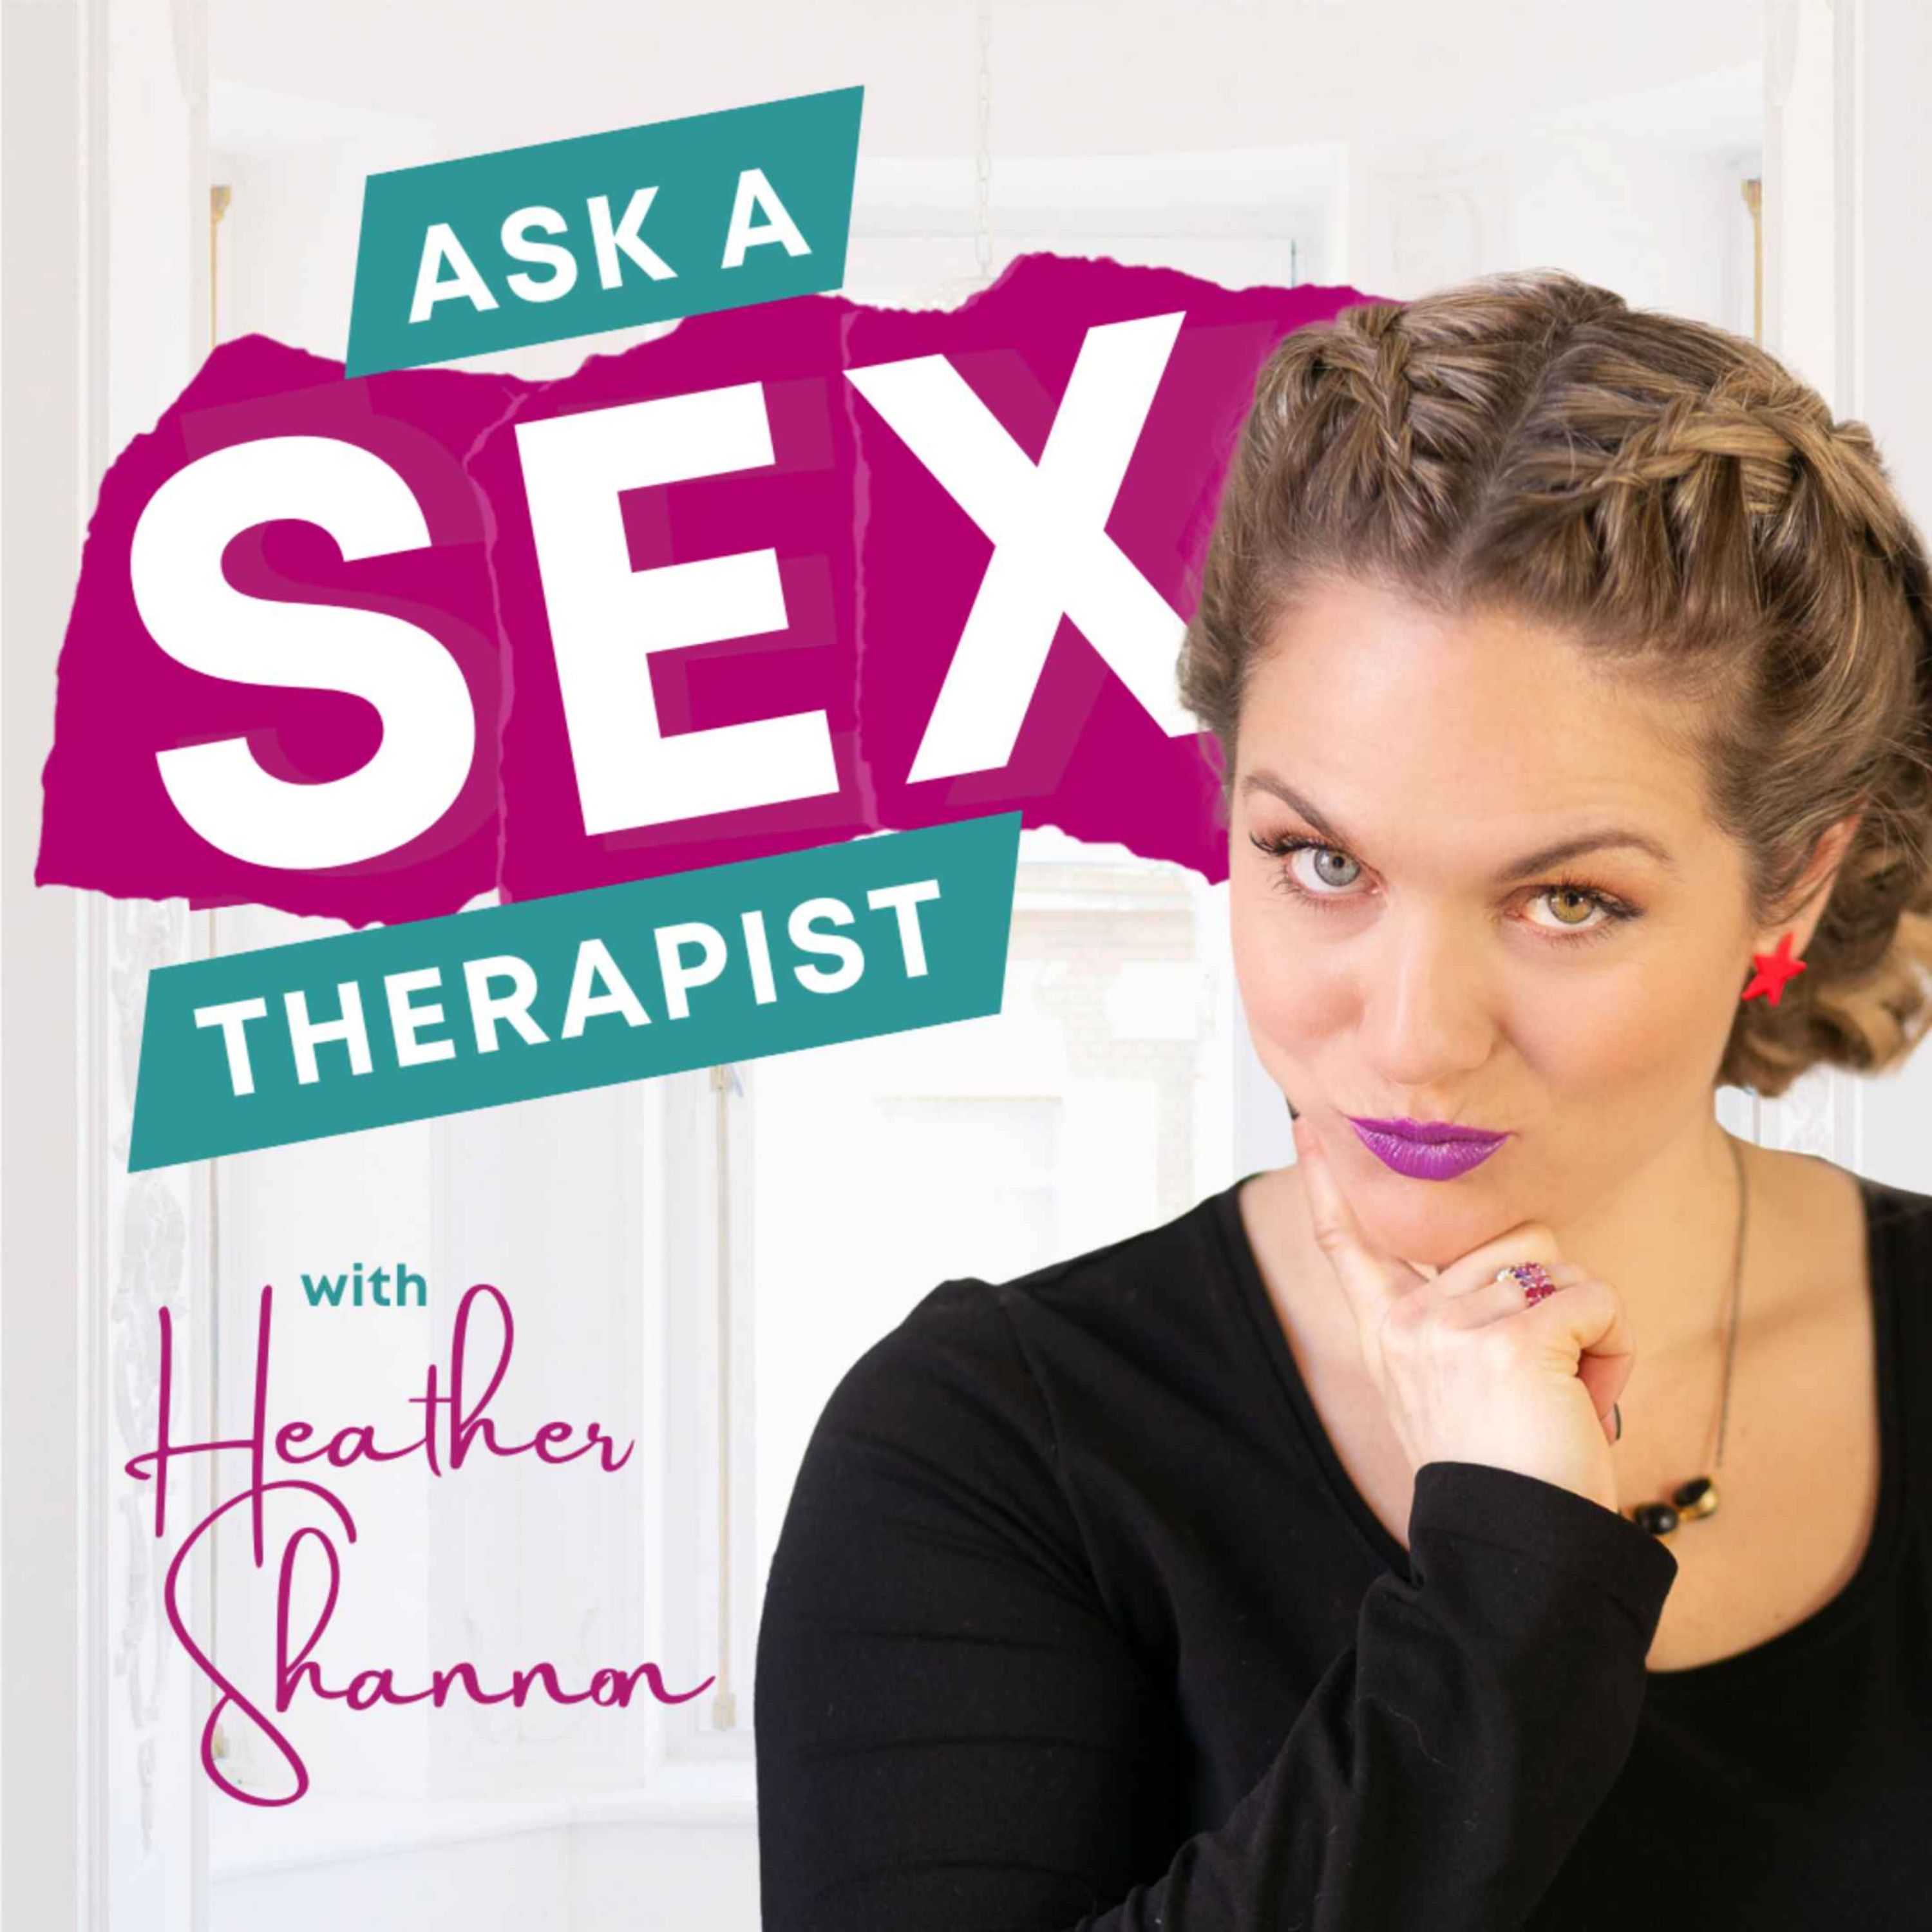 Artwork for Ask A Sex Therapist with Heather Shannon